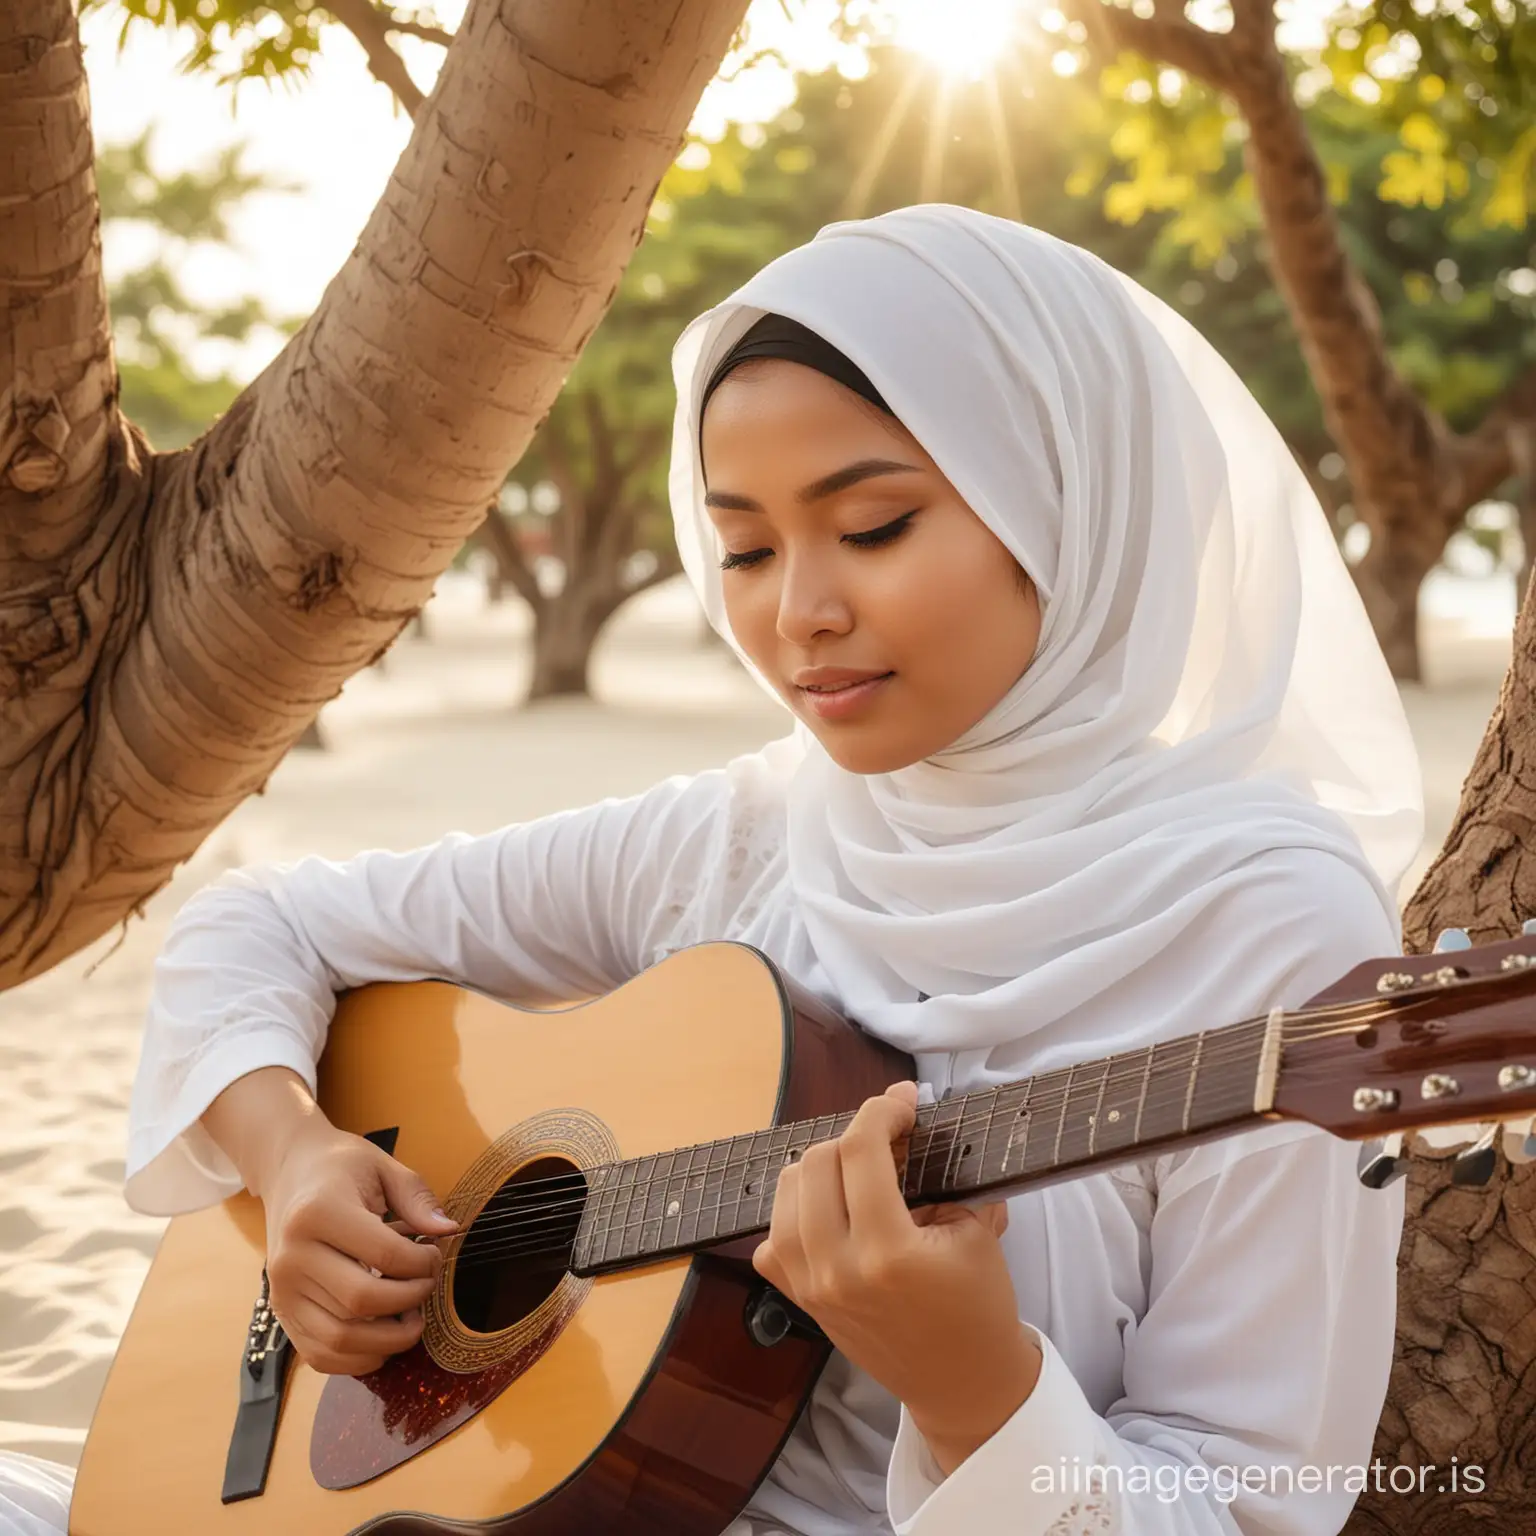 Indonesian-Woman-in-White-Hijab-Playing-Guitar-by-the-Sea